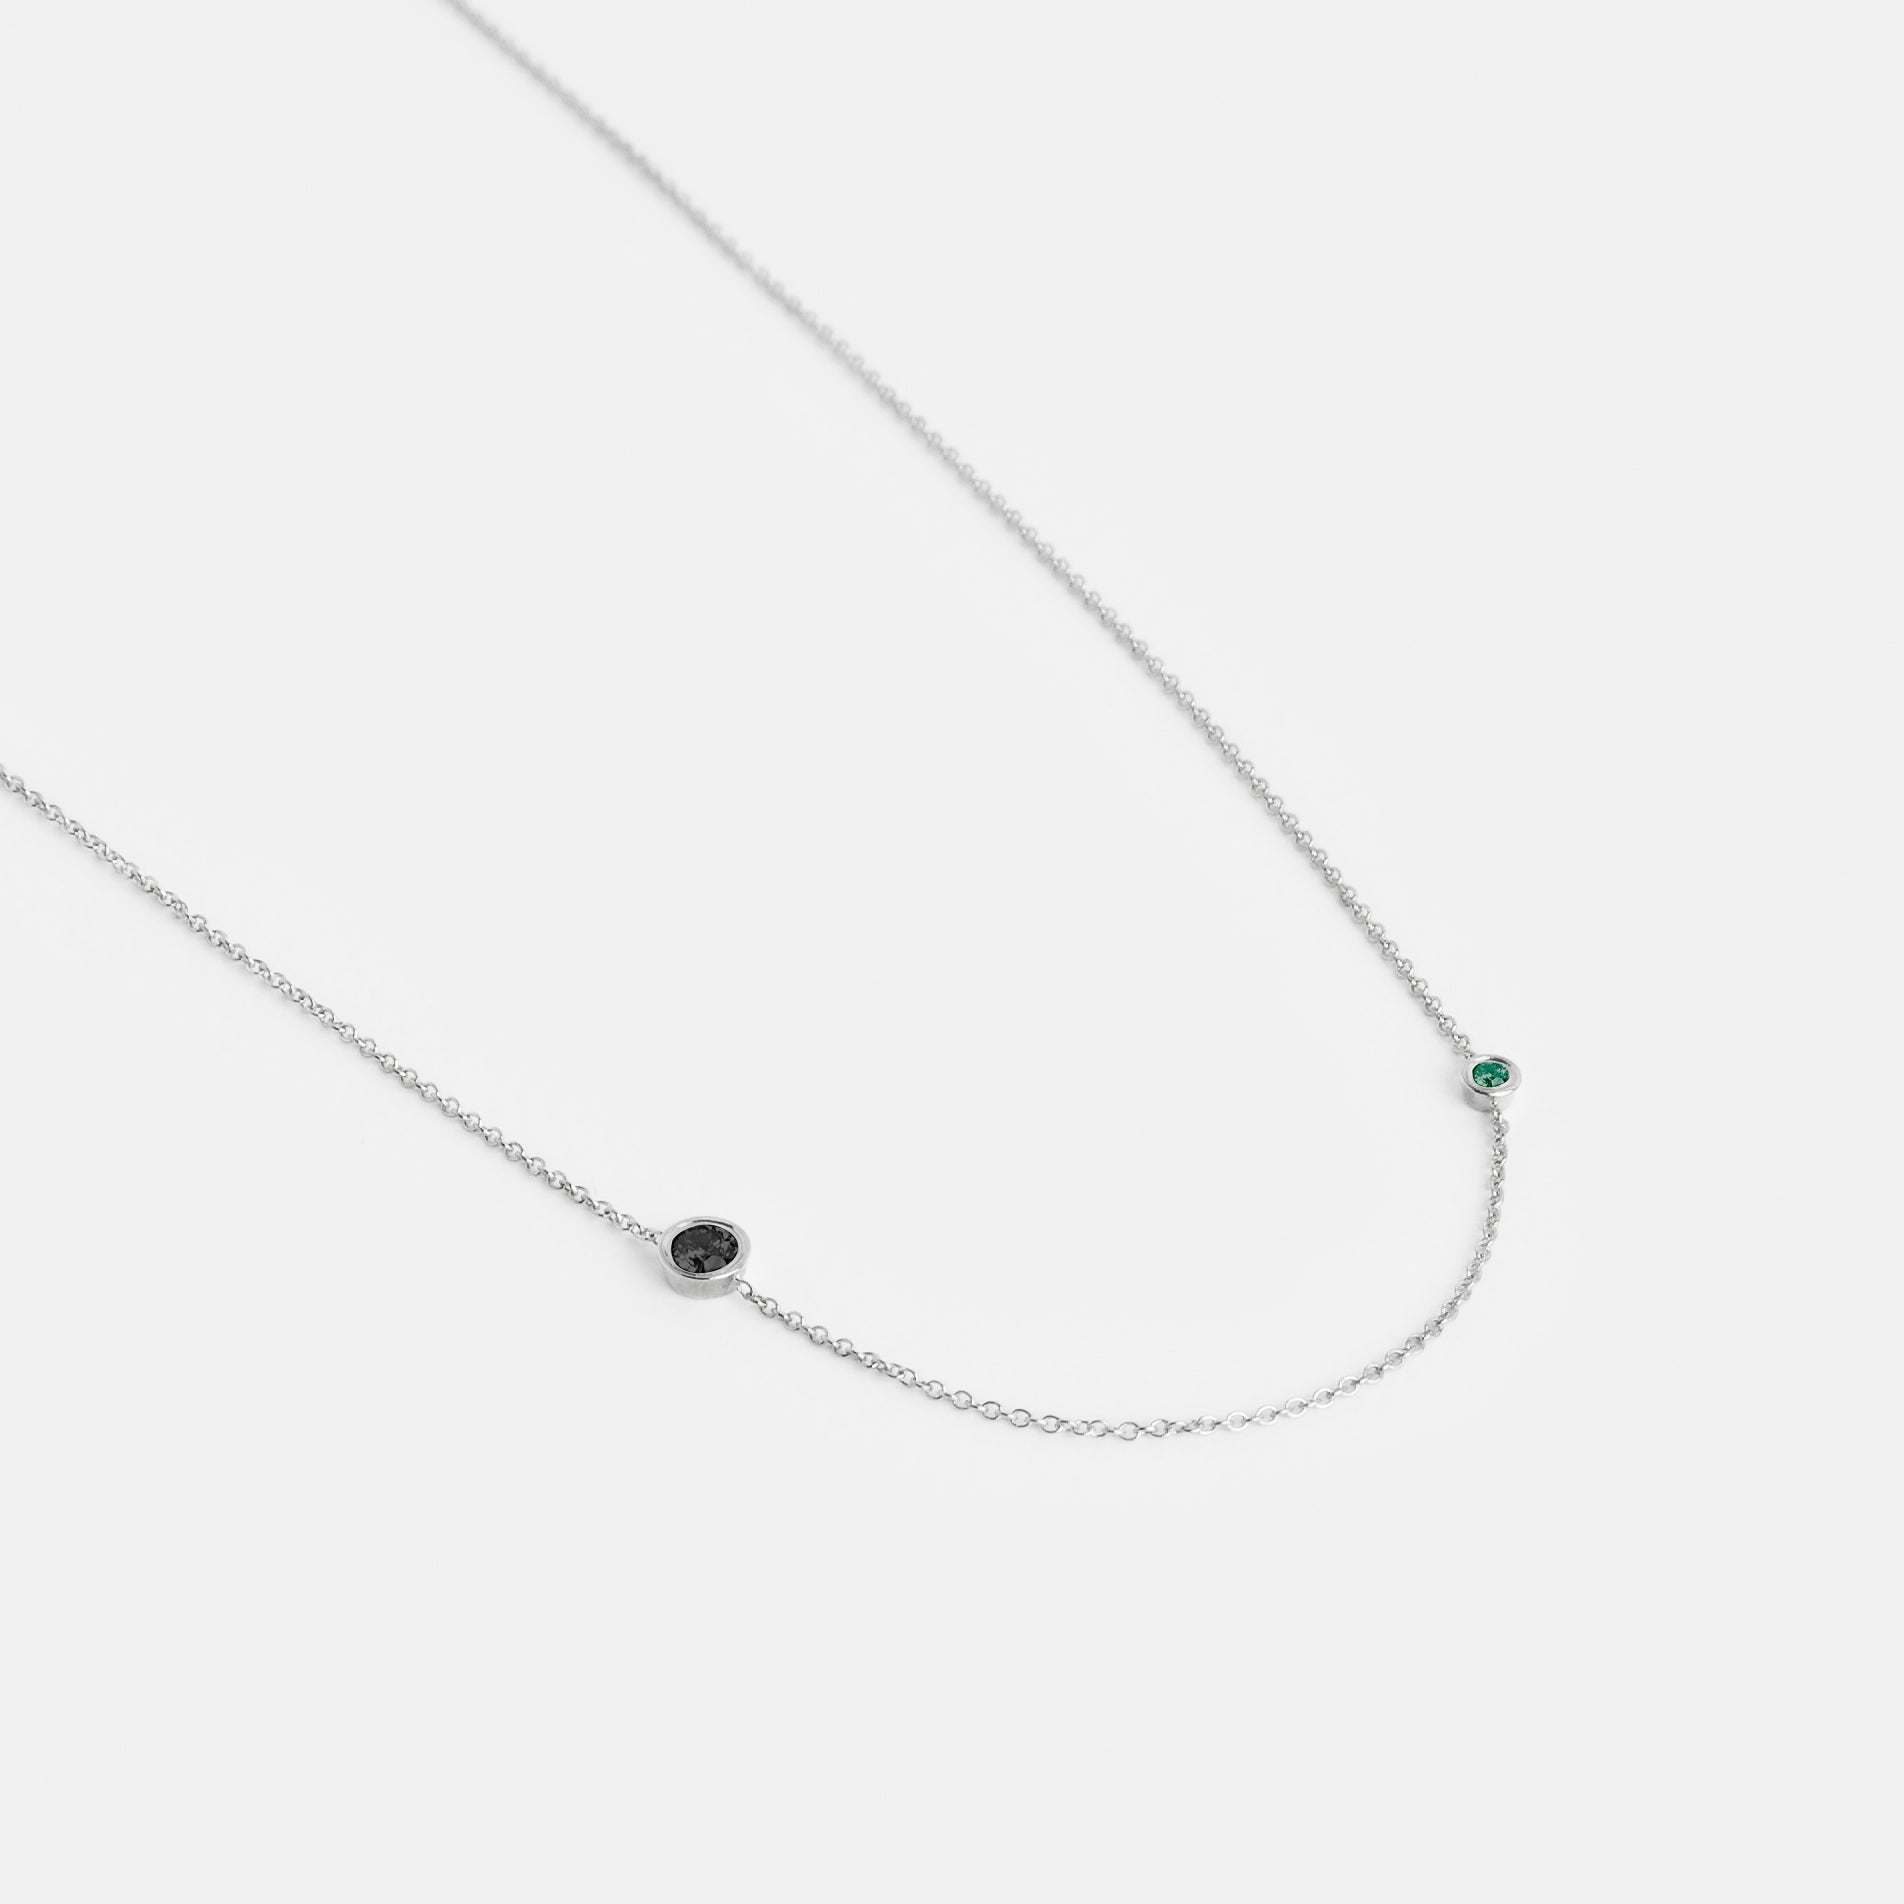 Iba Minimalist Necklace in 14k White Gold set with Black Diamond and Emerald By SHW Fine Jewelry NYC